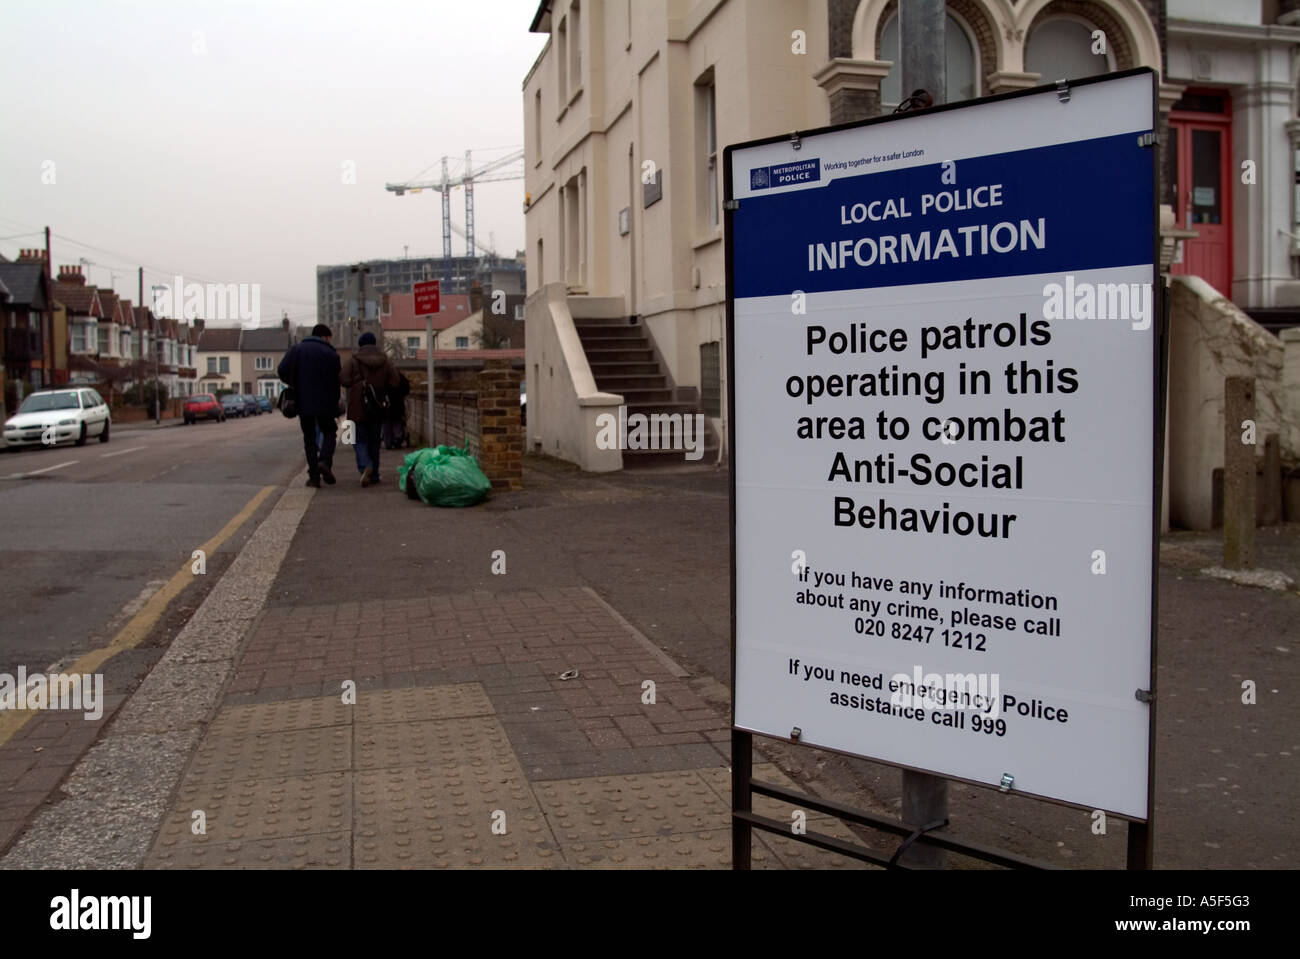 Metropolitan police sign warning of police presence in area to combat anti social behaviour Hounslow, Middlesex, west London, UK. Stock Photo